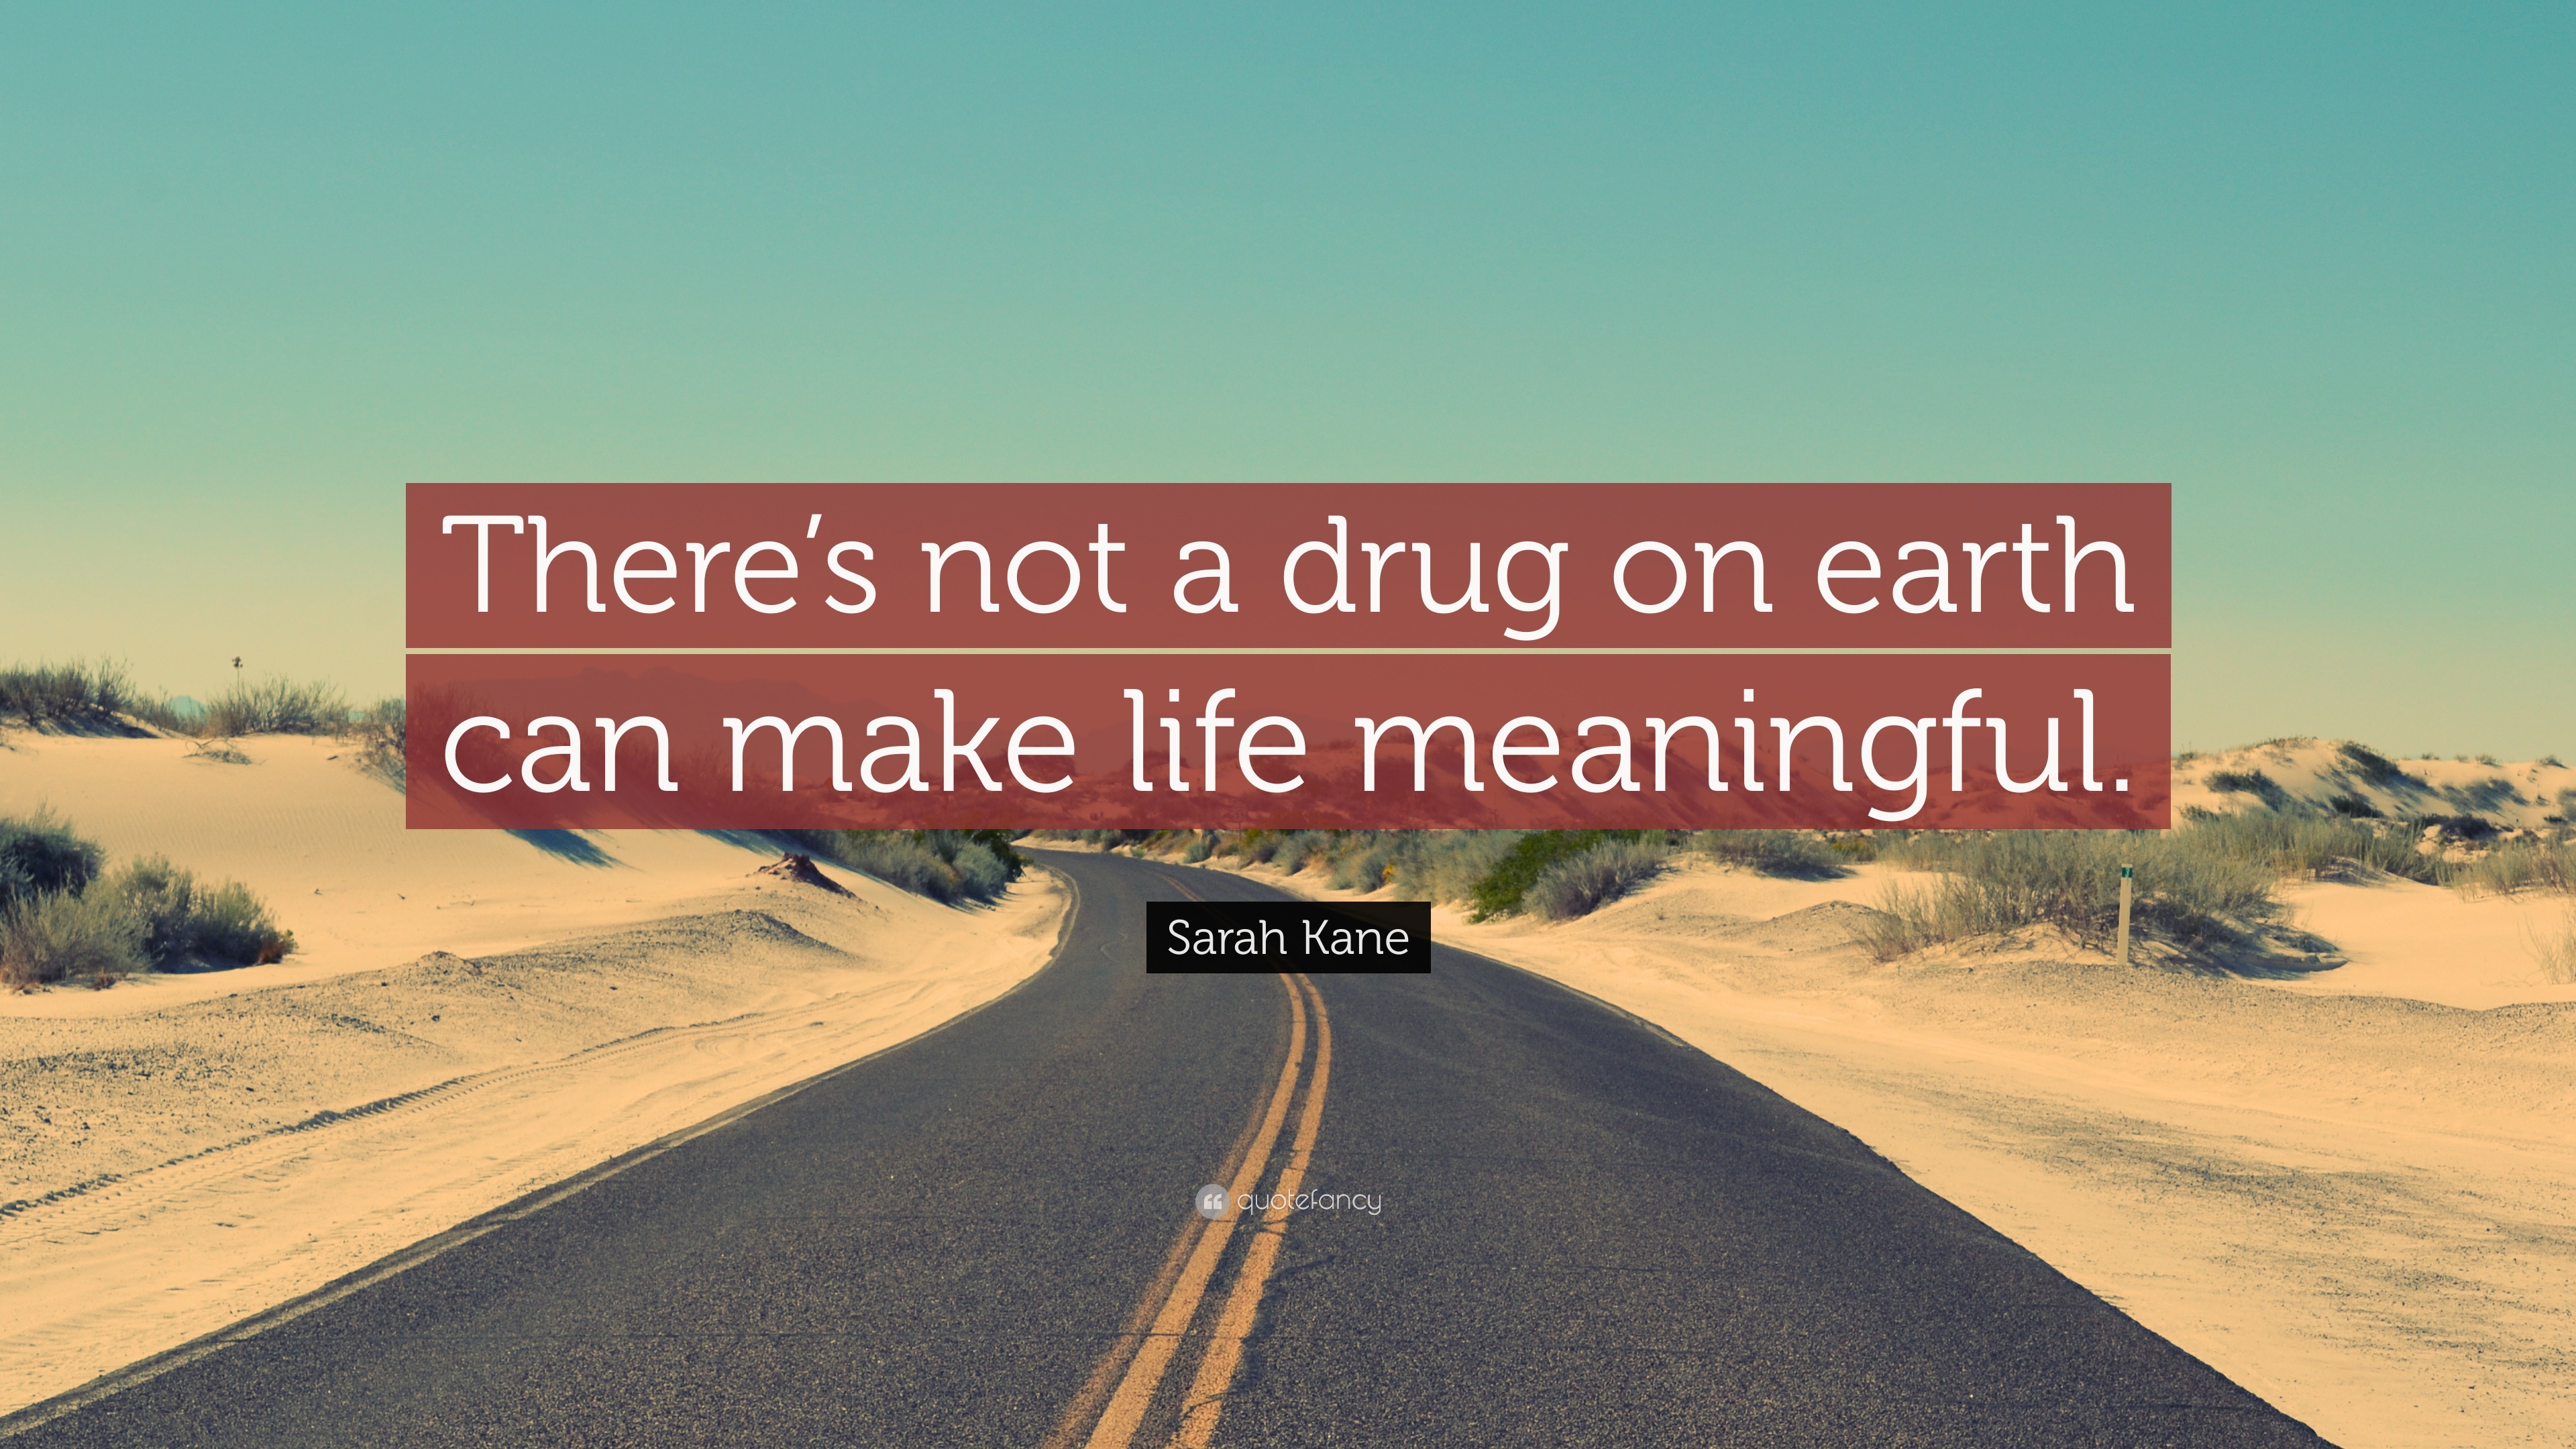 Sarah Kane Quote “There s not a on earth can make life meaningful